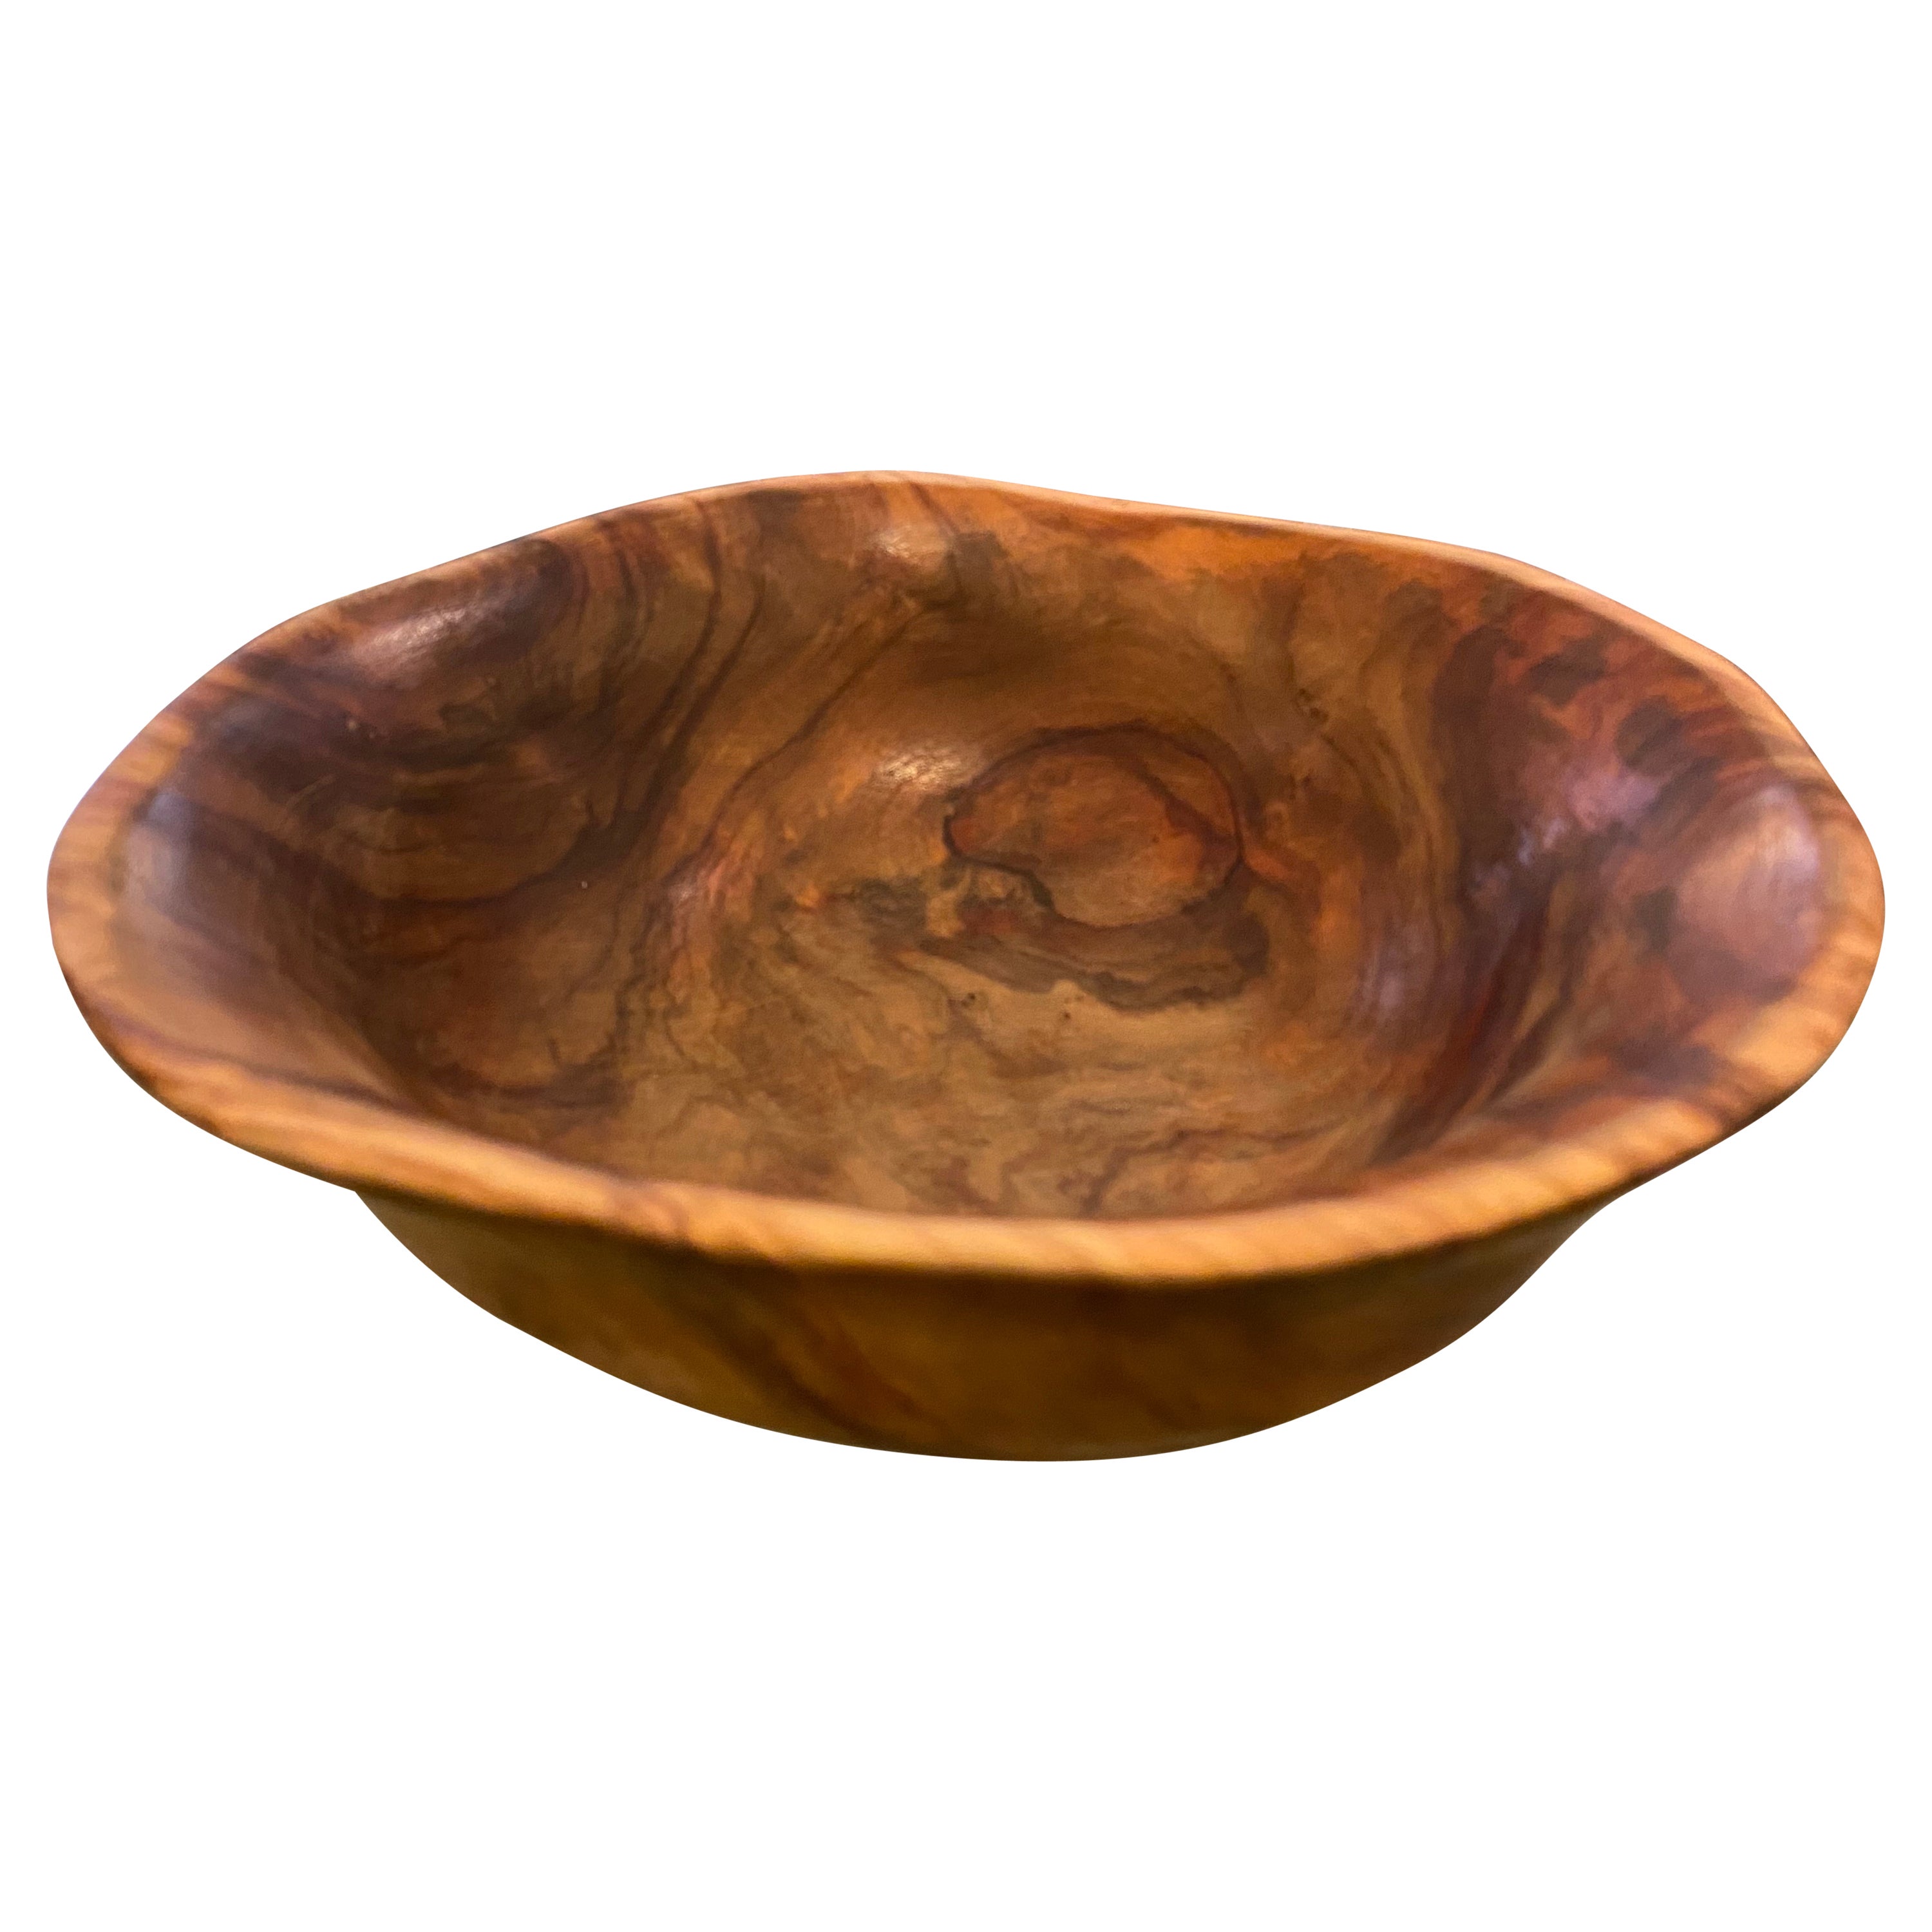 Alexandre Noll 1930s Turned Wood Bowl For Sale